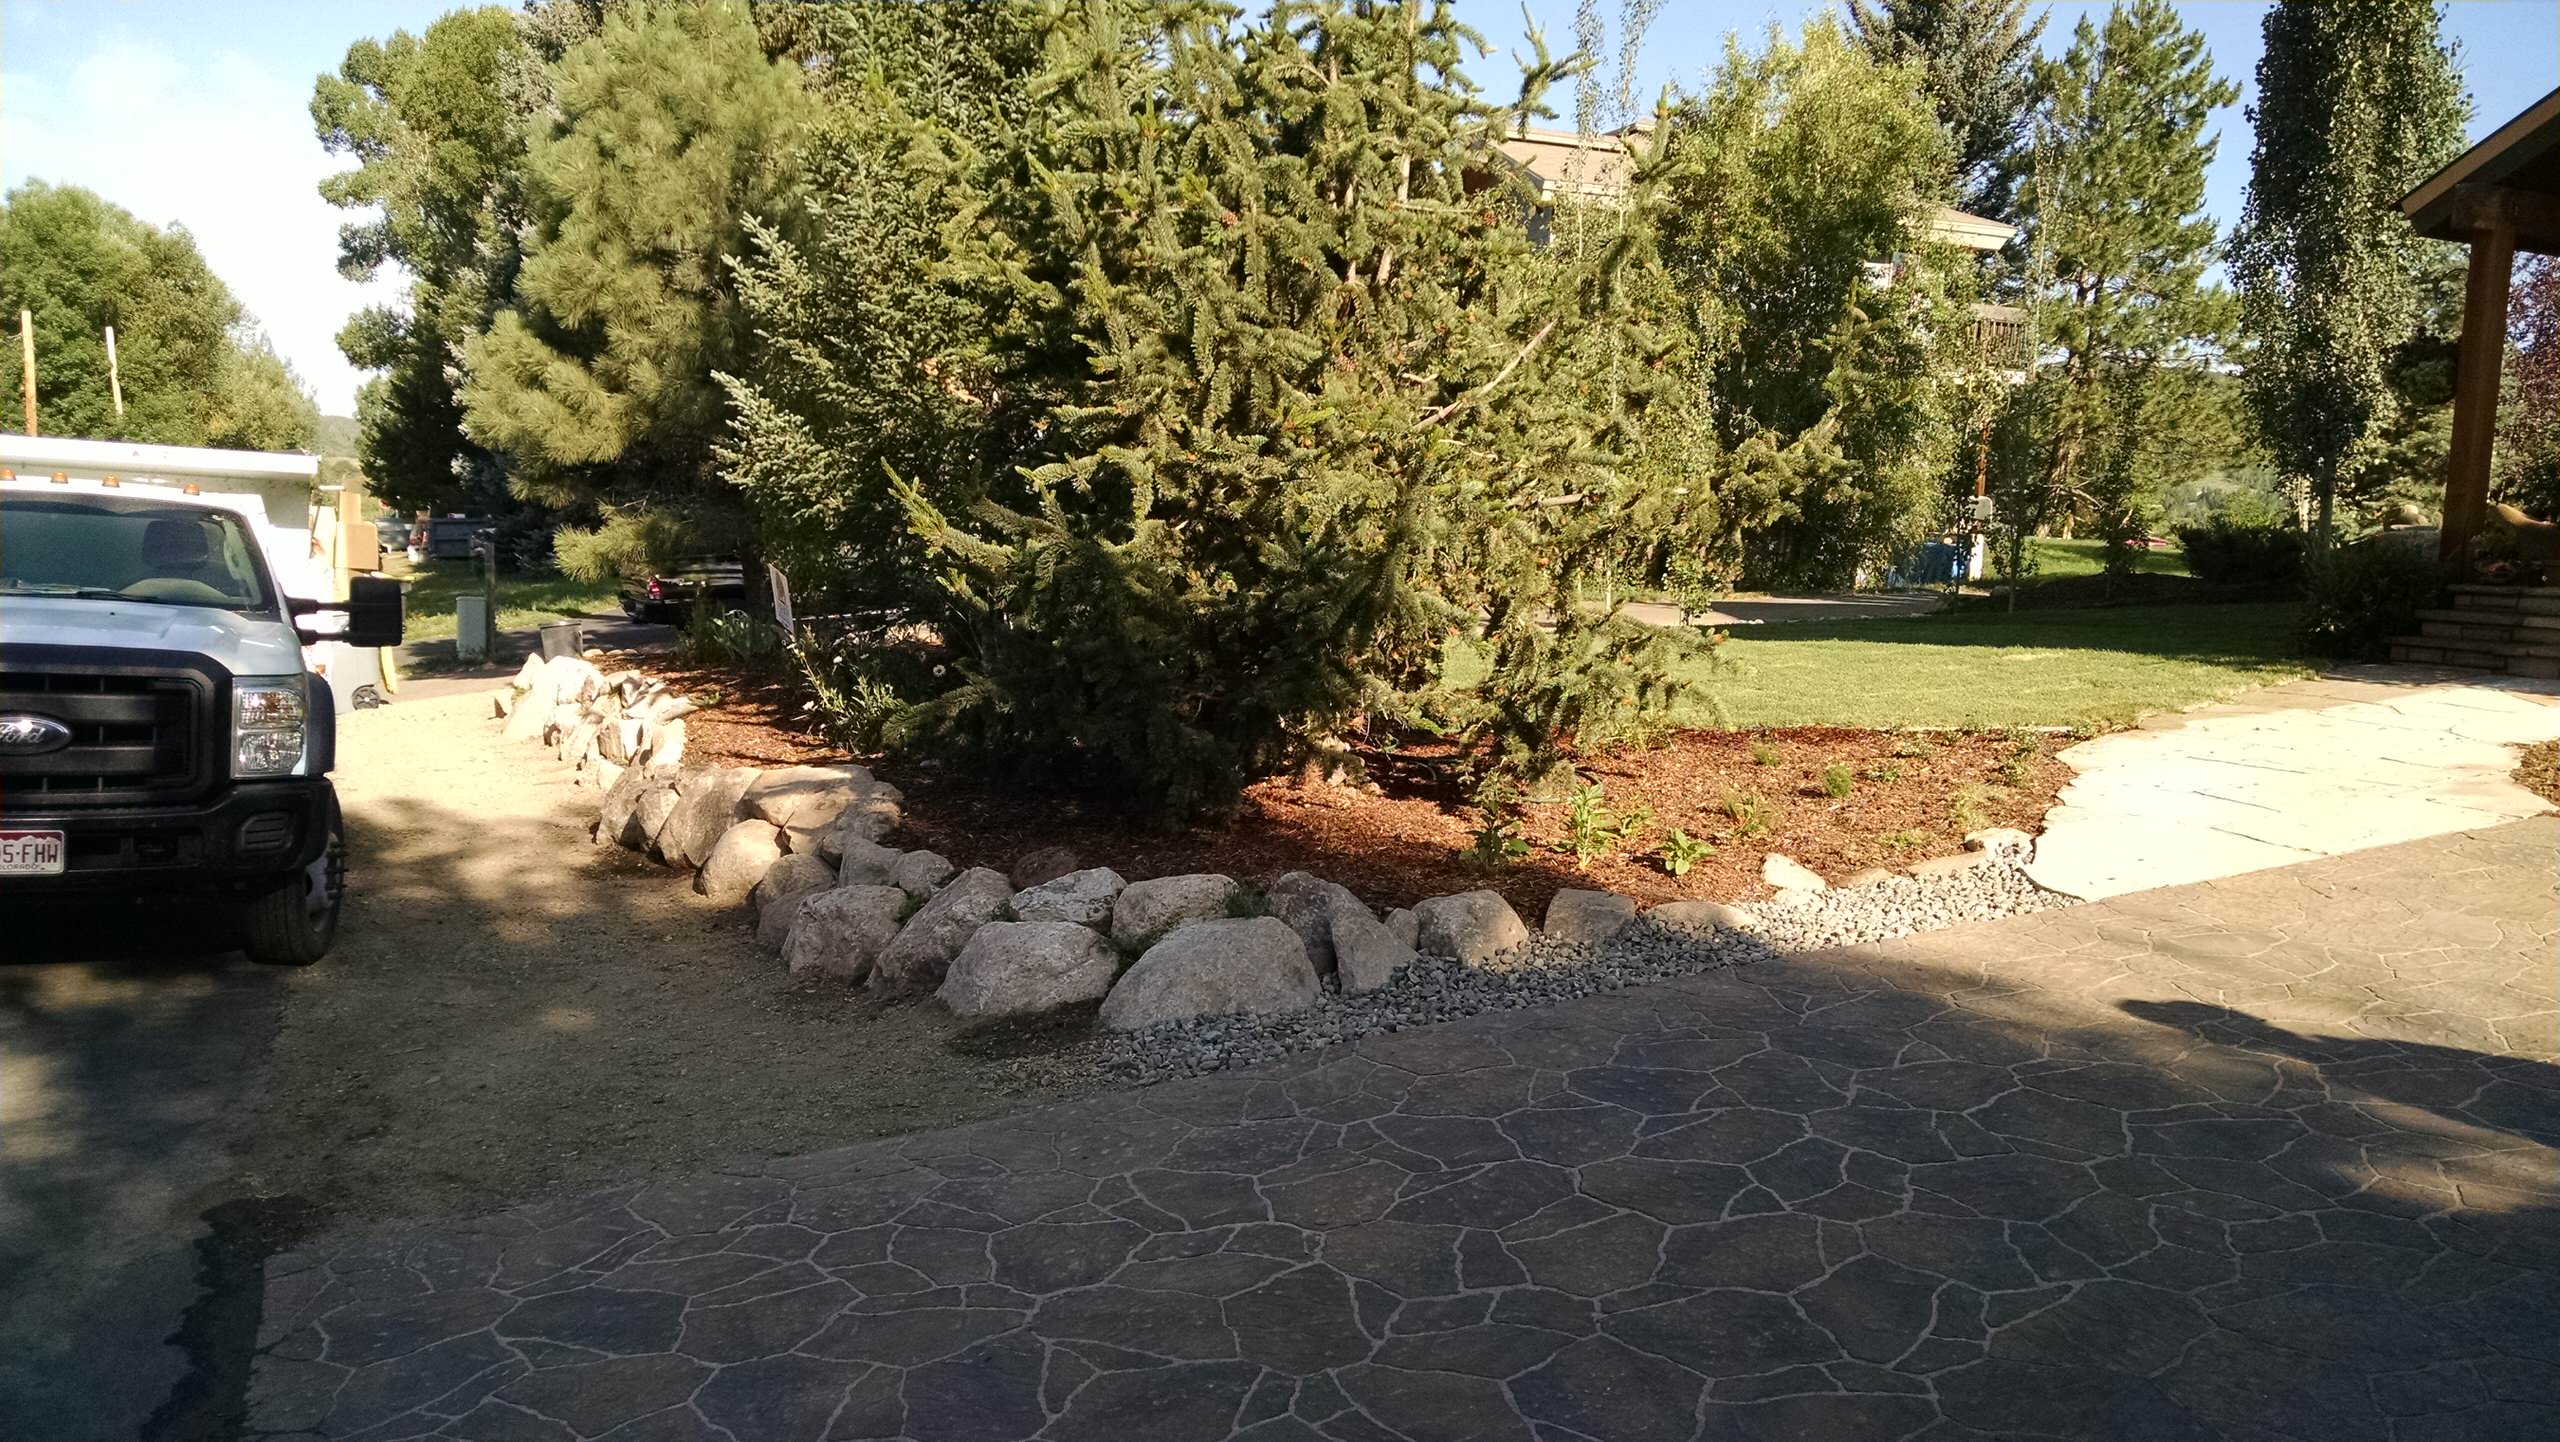 Major redo of a landscape for a quaint home in Steamboat